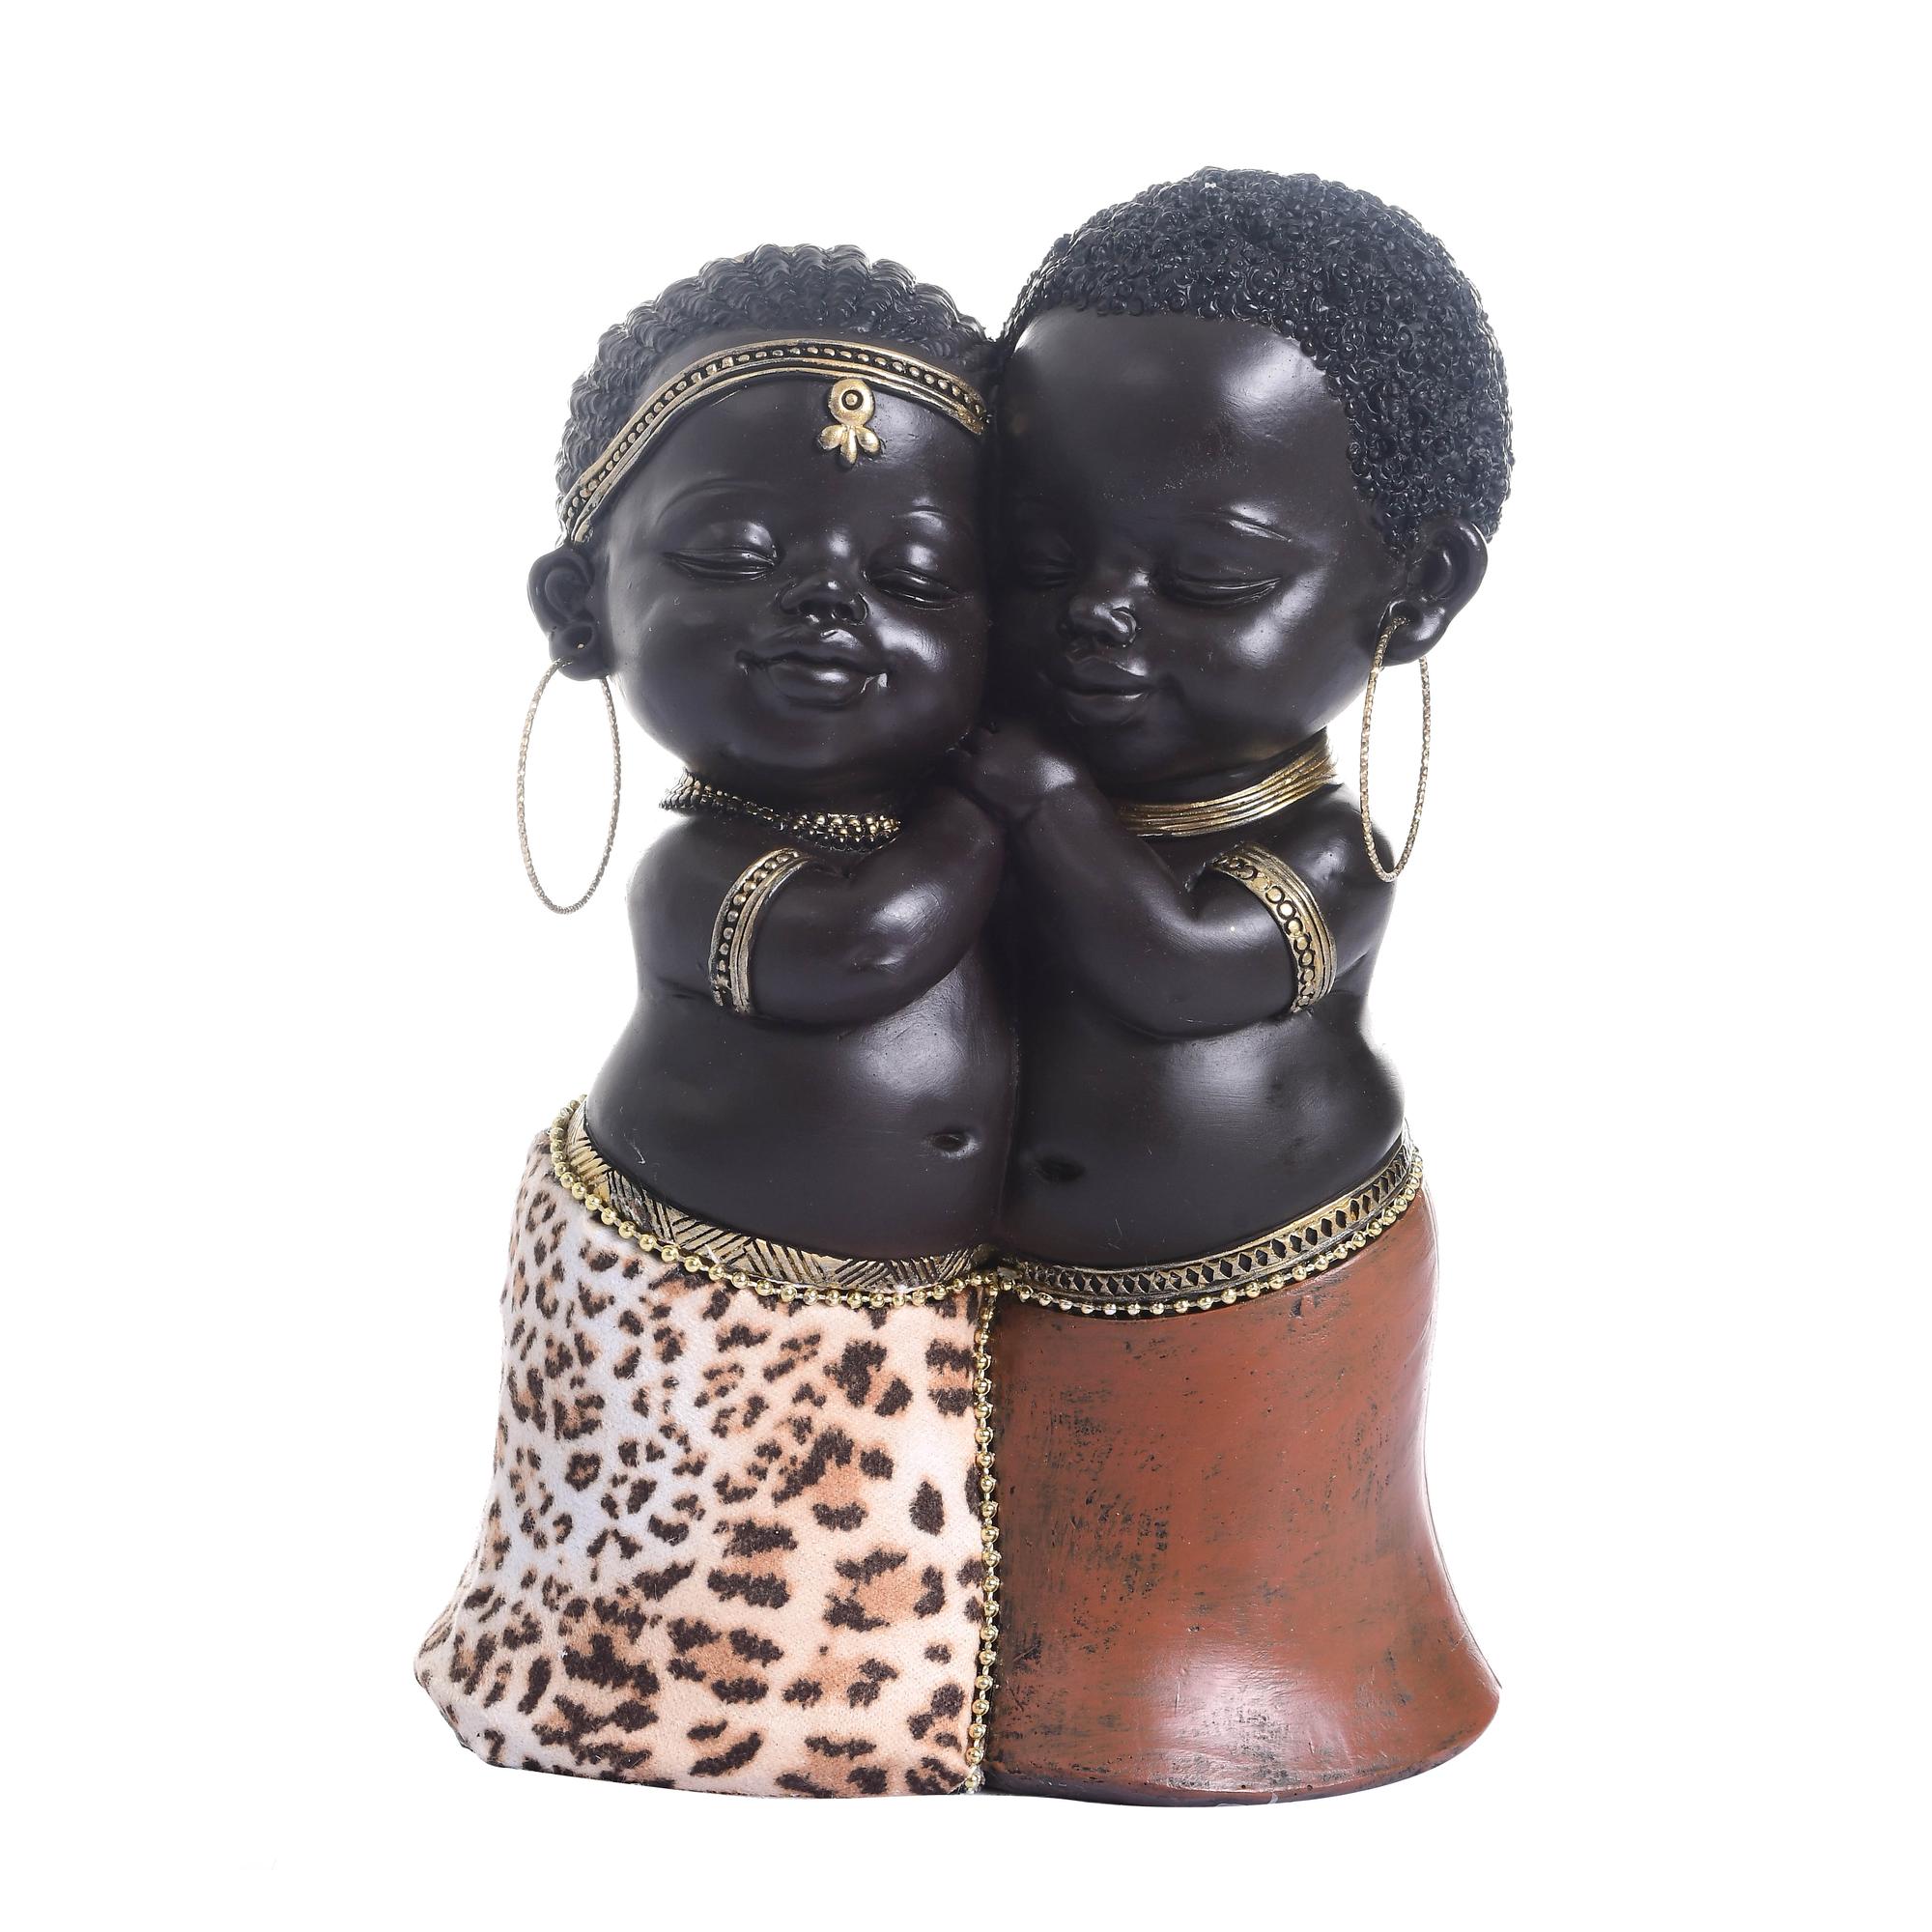 POLY AFRICAN KIDS DECOR - 559-02631